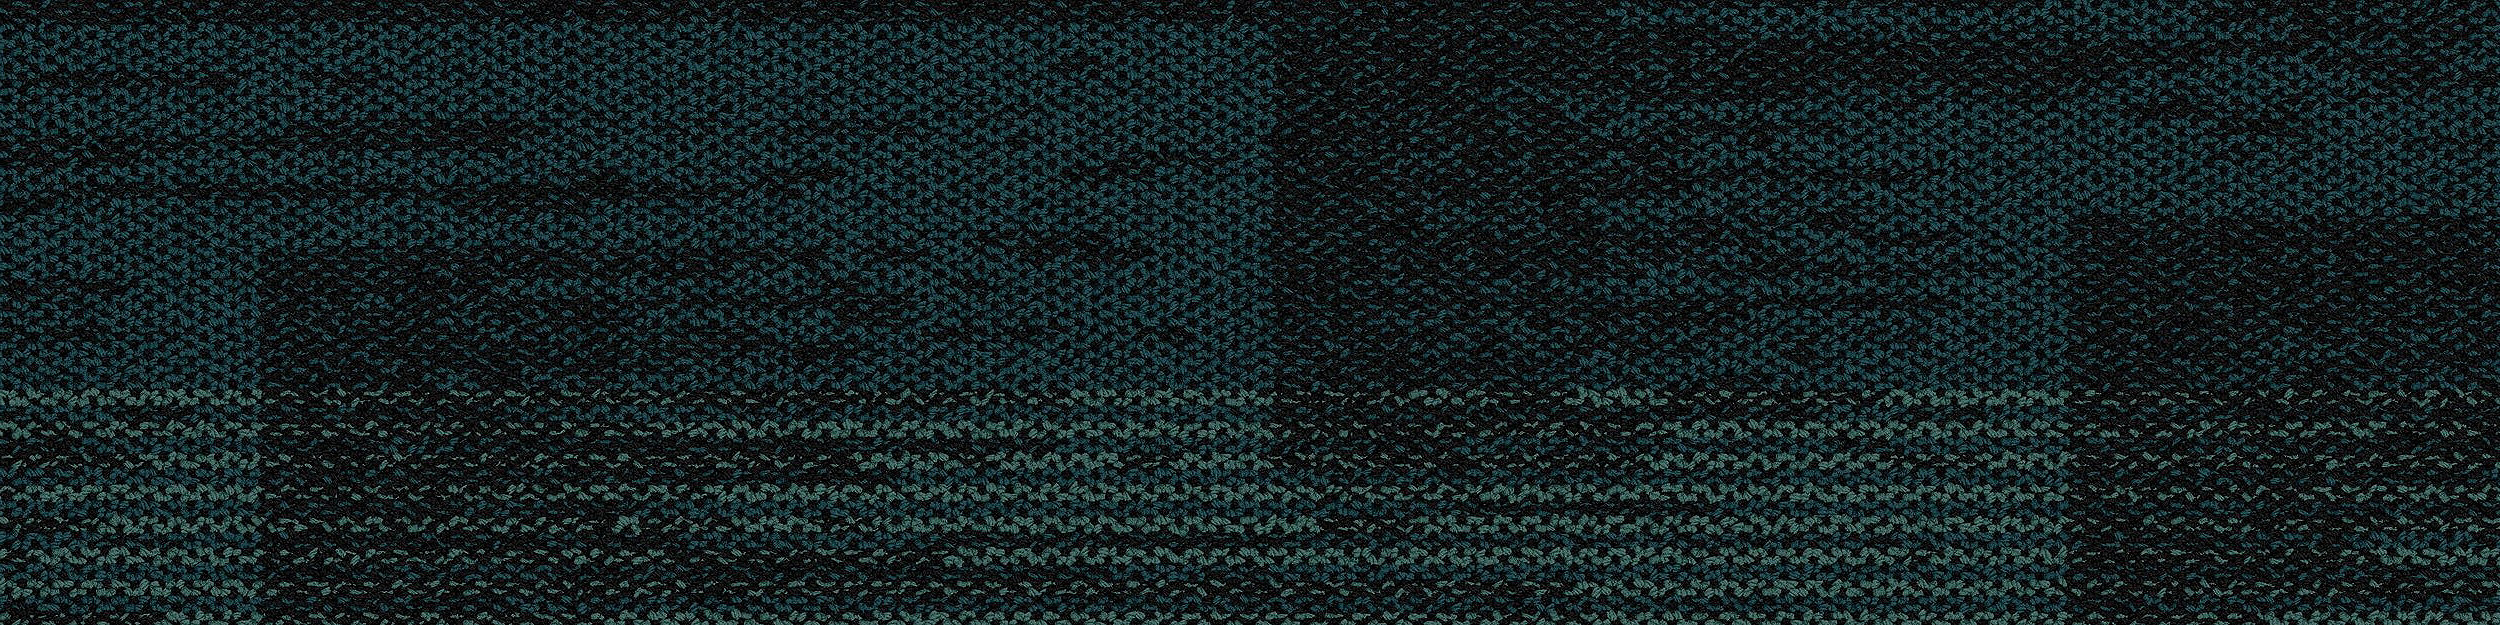 AE317 Carpet Tile In Emerald image number 13